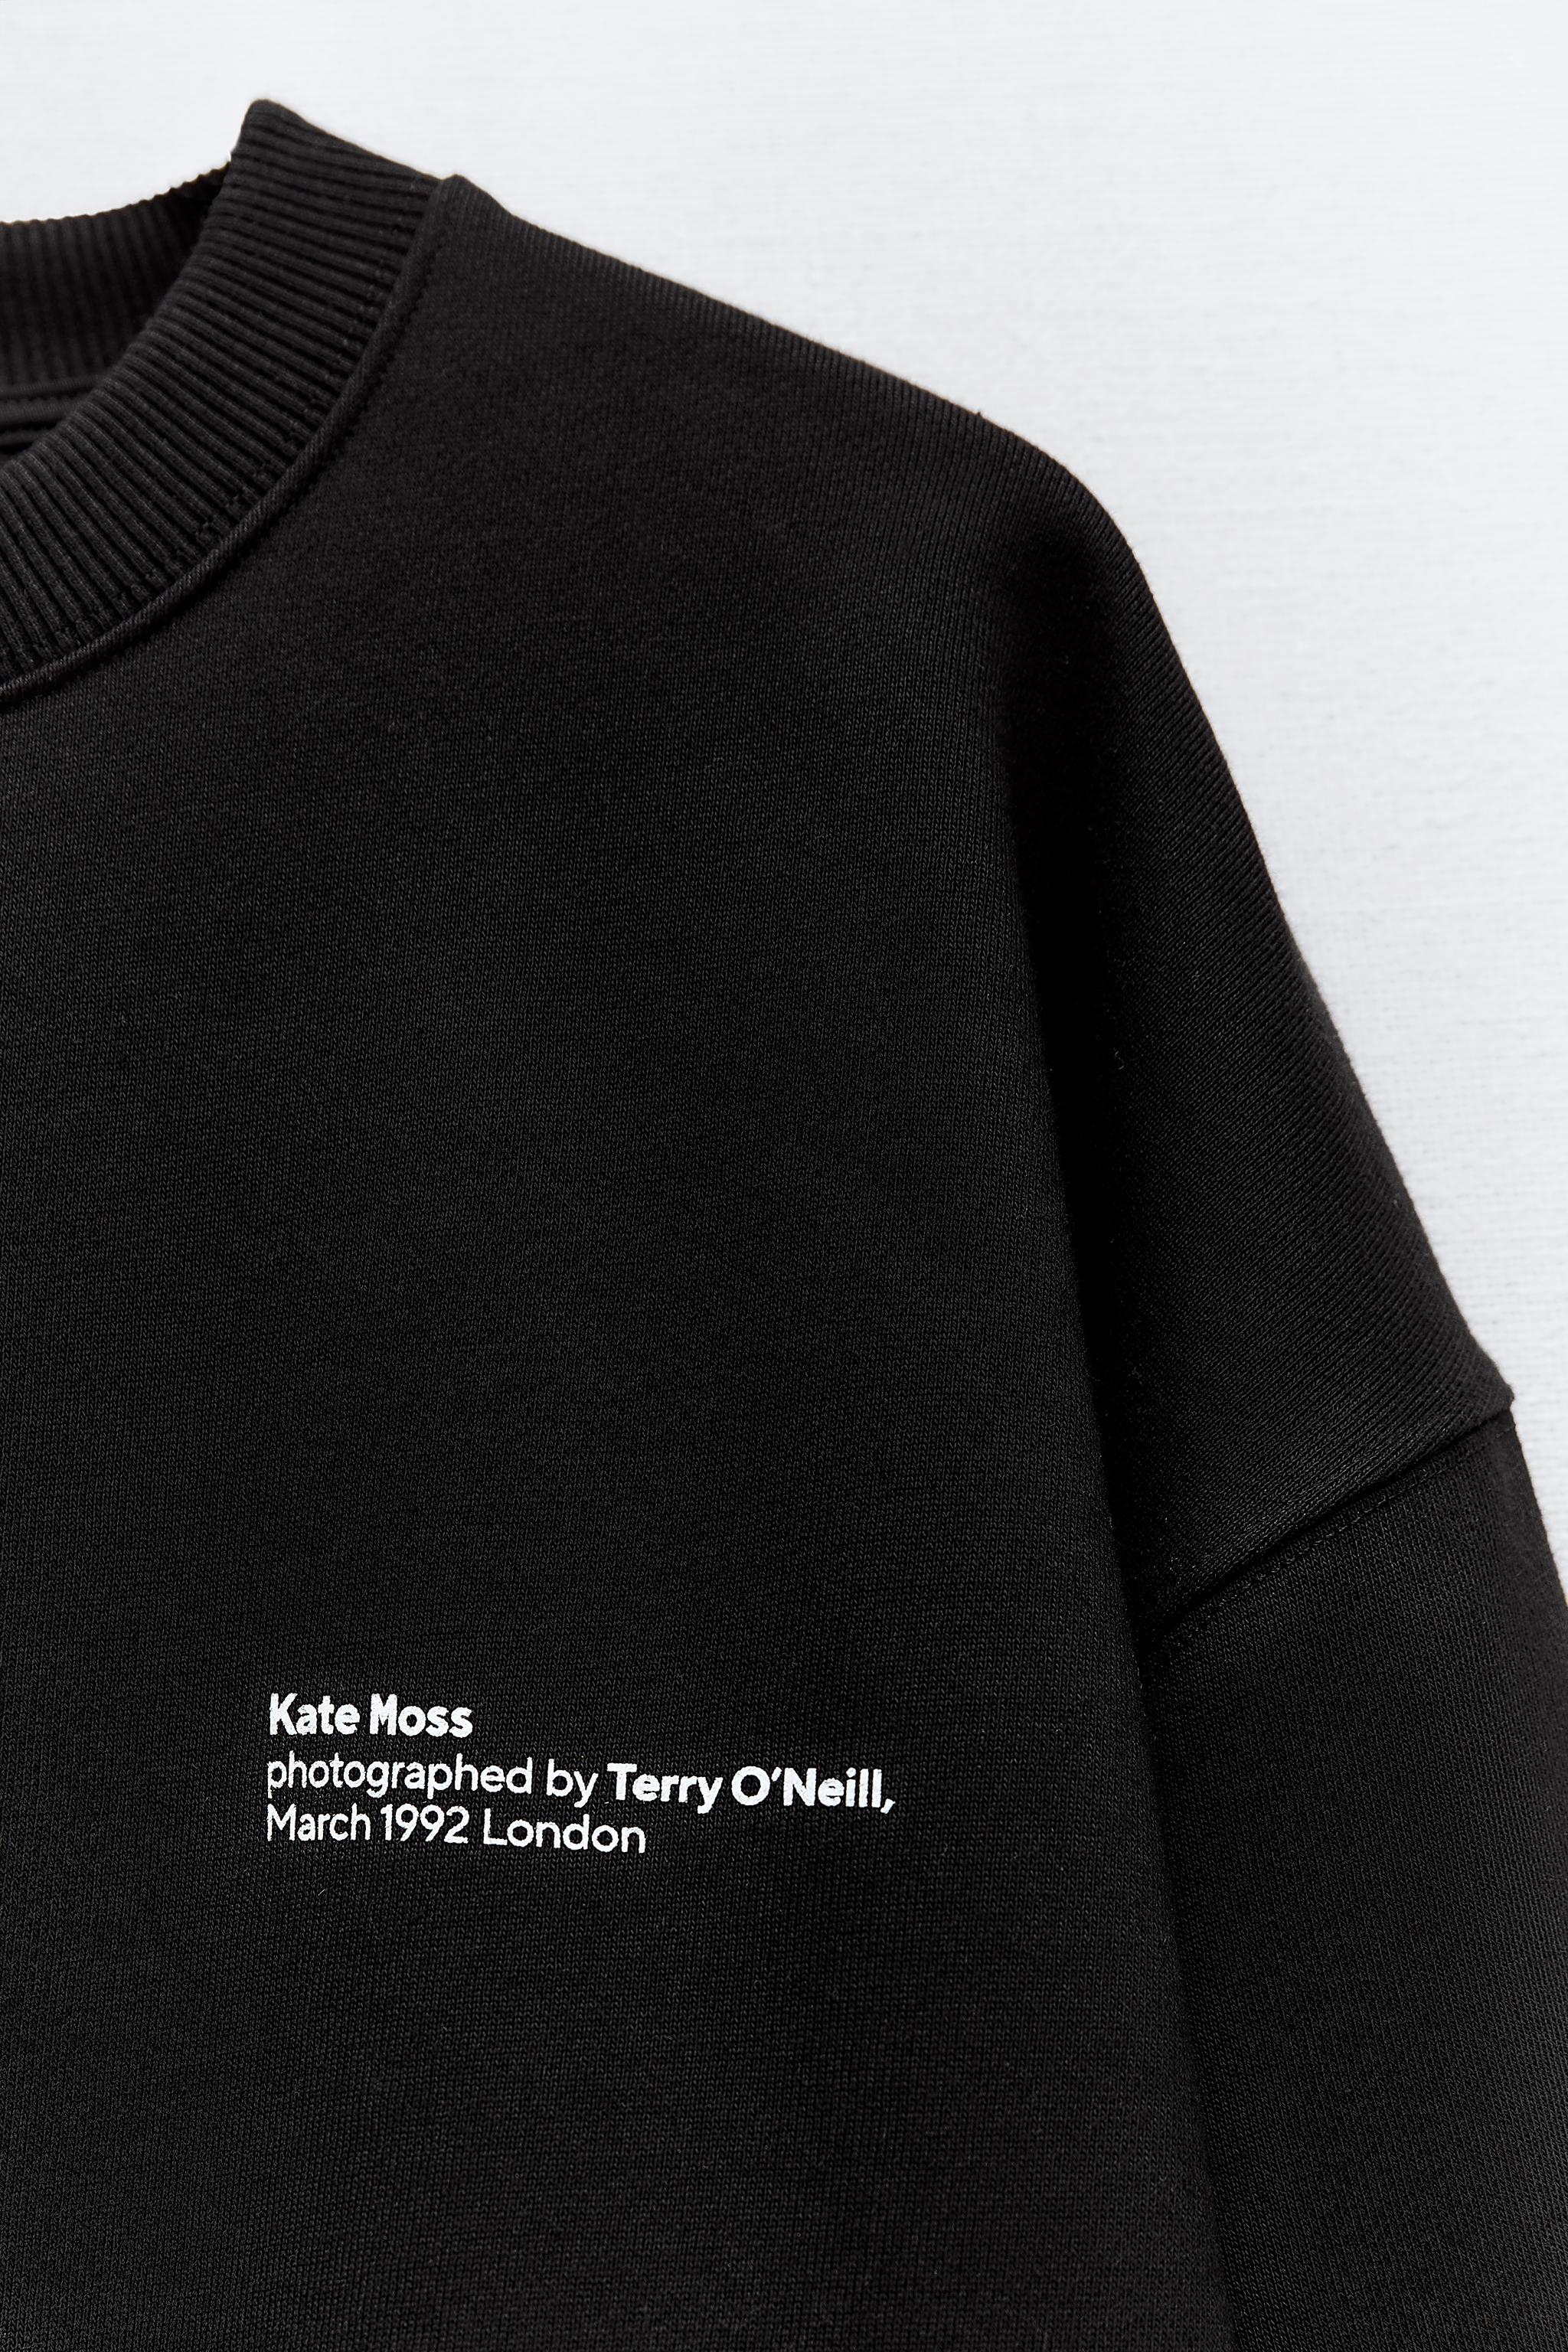 KATE MOSS © ICONIC IMAGES / TERRY O’NEILL 2024 SWEATSHIRT